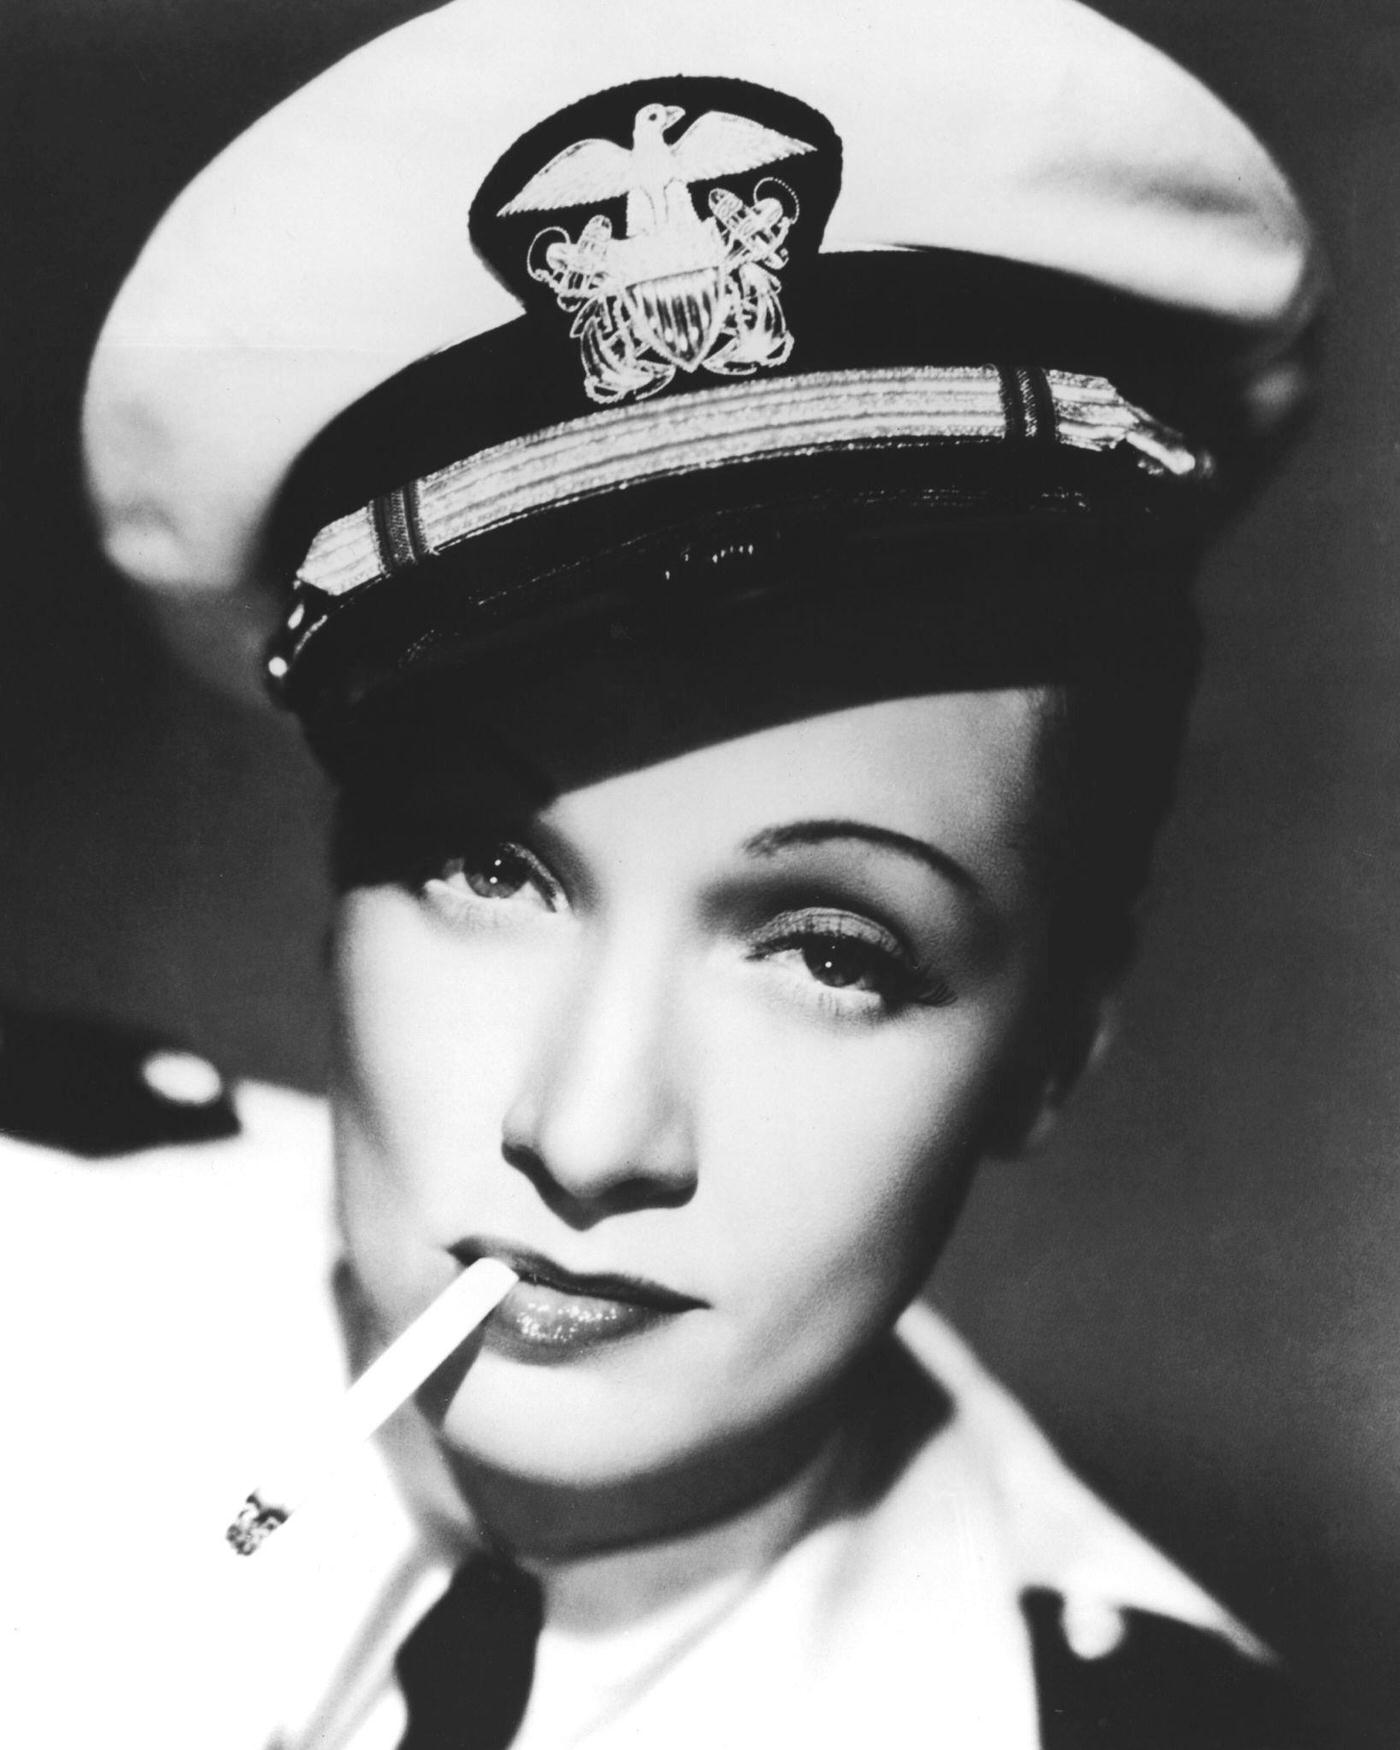 Marlene Dietrich looks stylish in a sailor's cap and cigarette in a promotional portrait for 'Seven Sinners.'